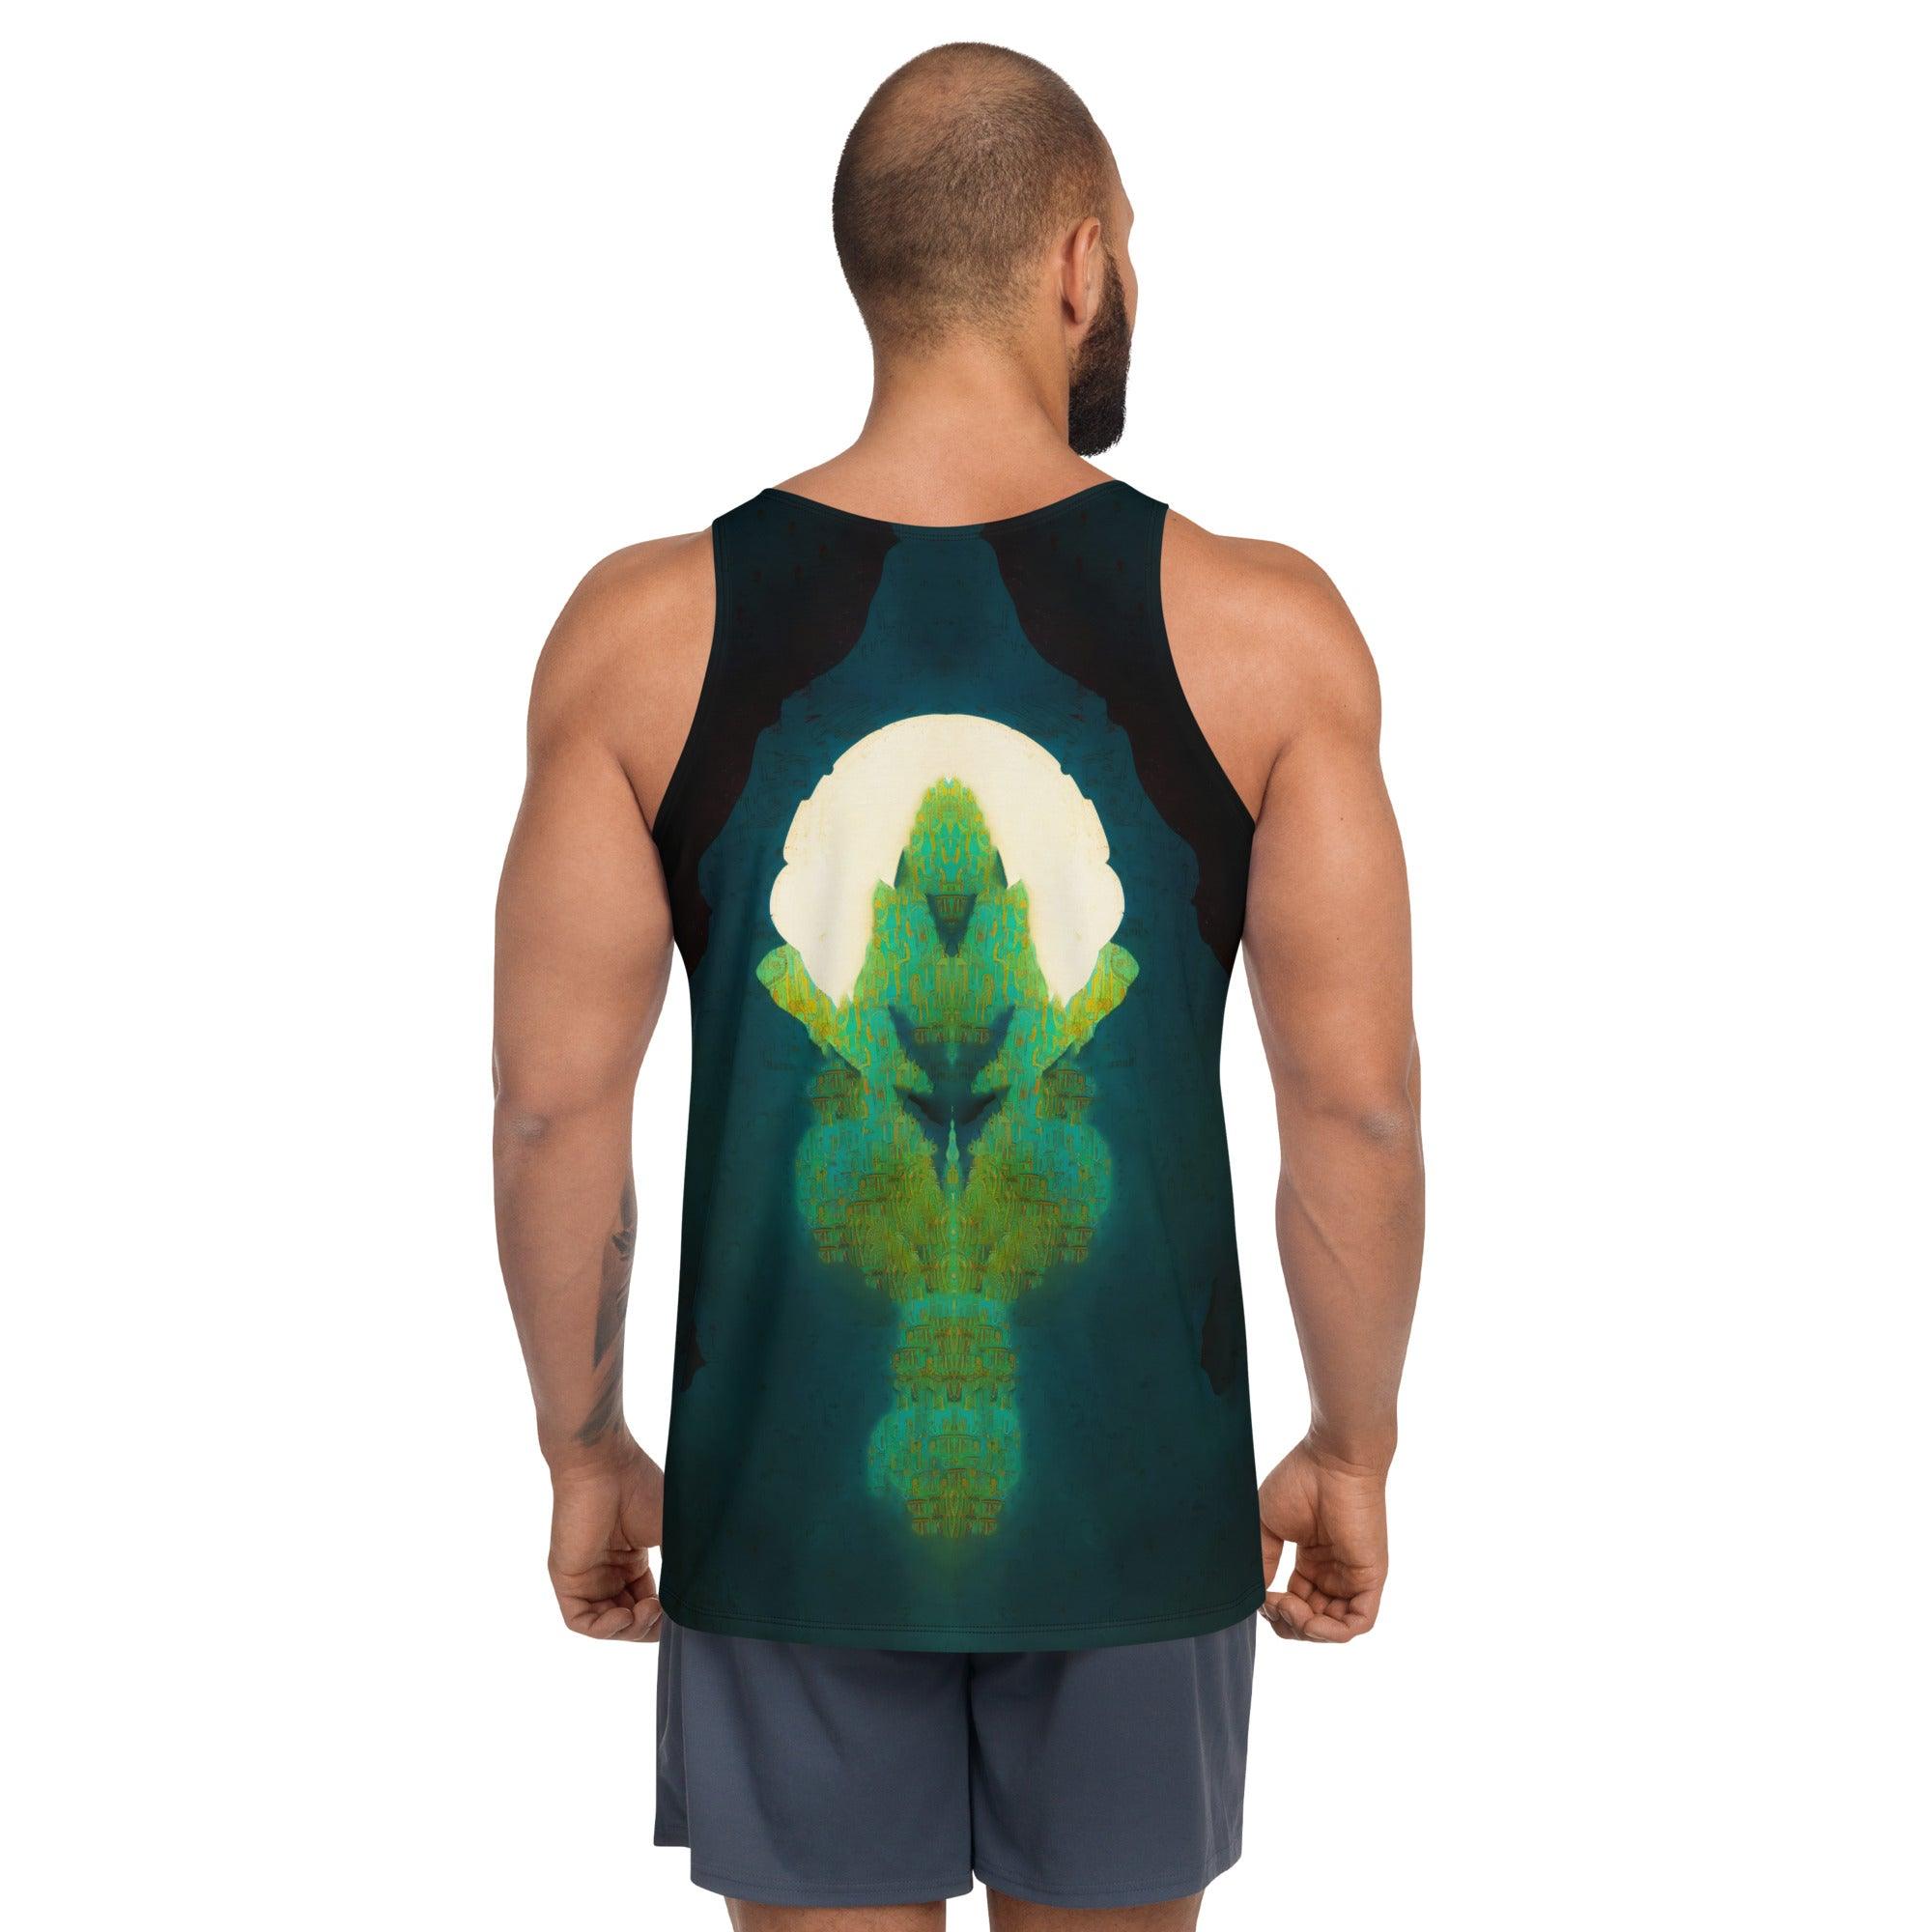 NS 813 men's athletic tank top front view.